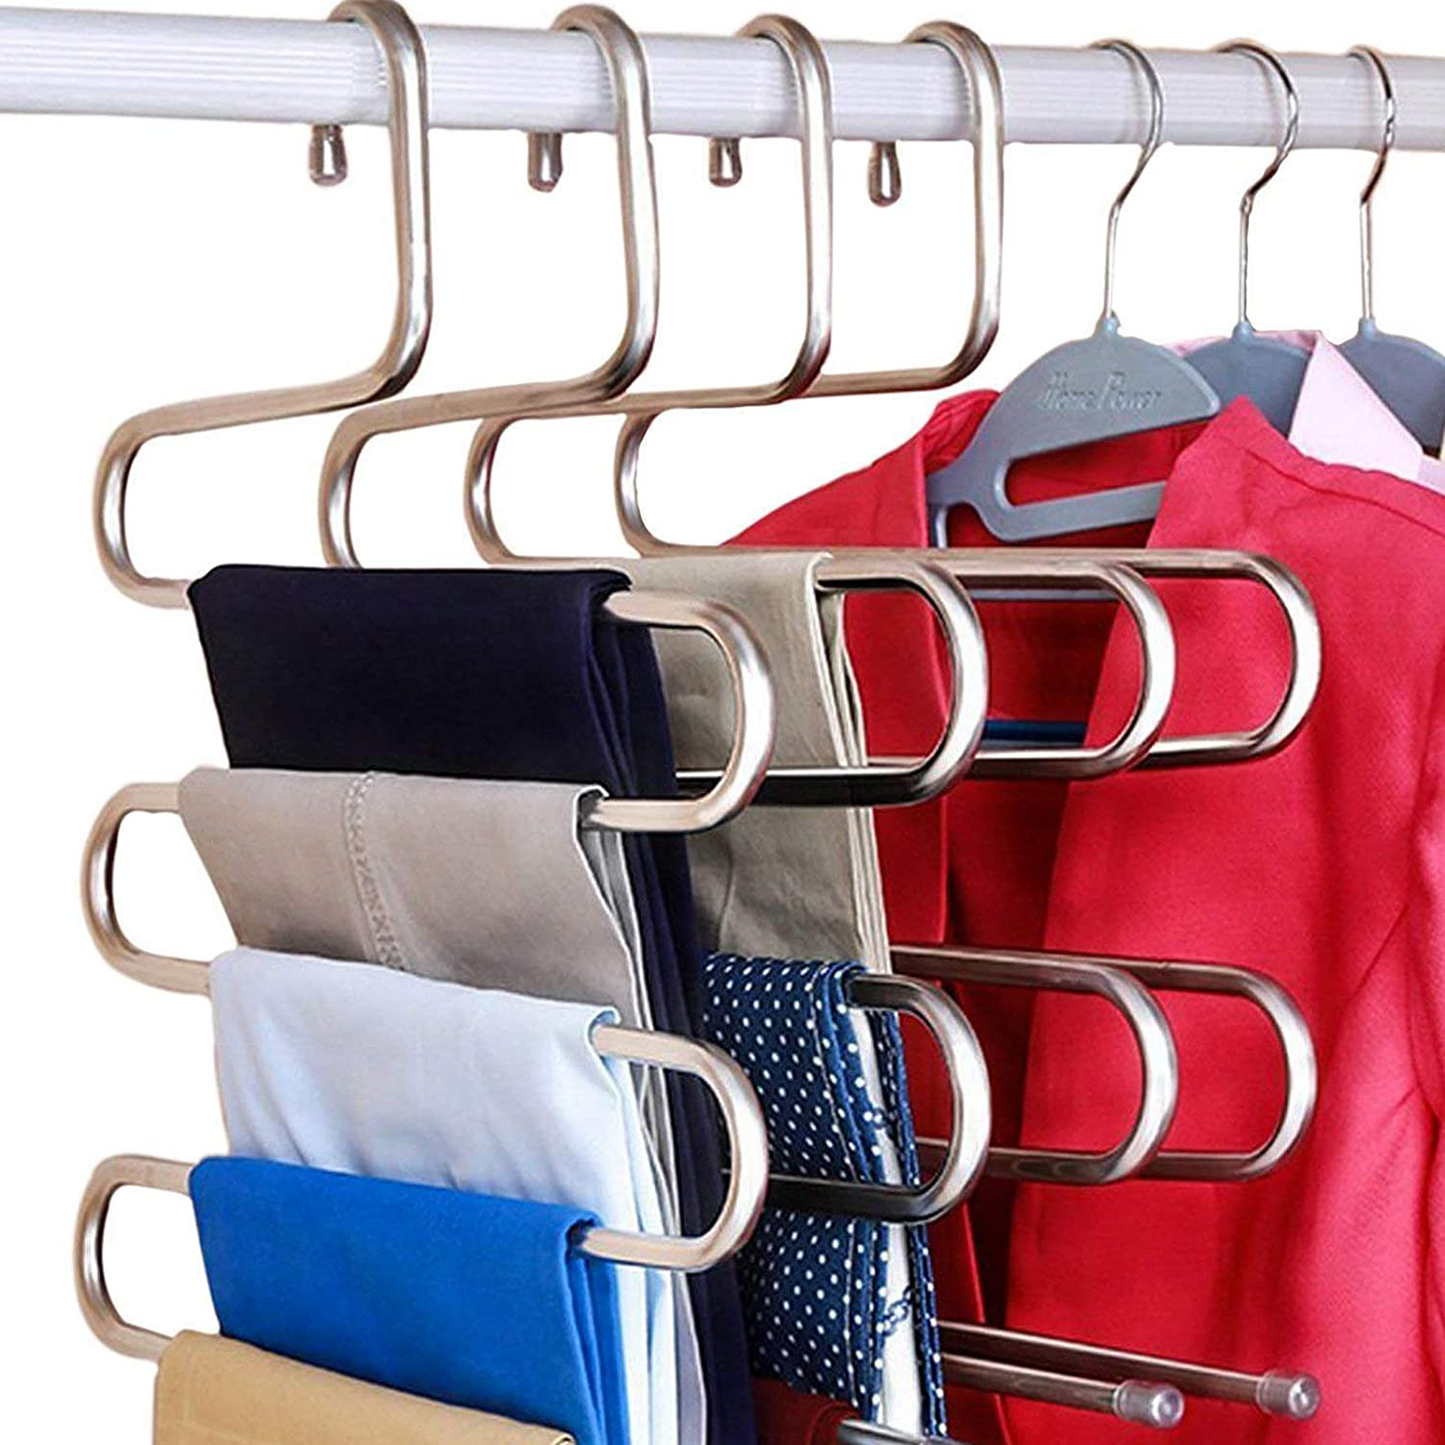 DOIOWN S-Type Stainless Steel Clothes Pants Hangers Closet Storage Organizer for Pants Jeans Scarf Hanging (14.17 x 14.96ins) (1-Piece)